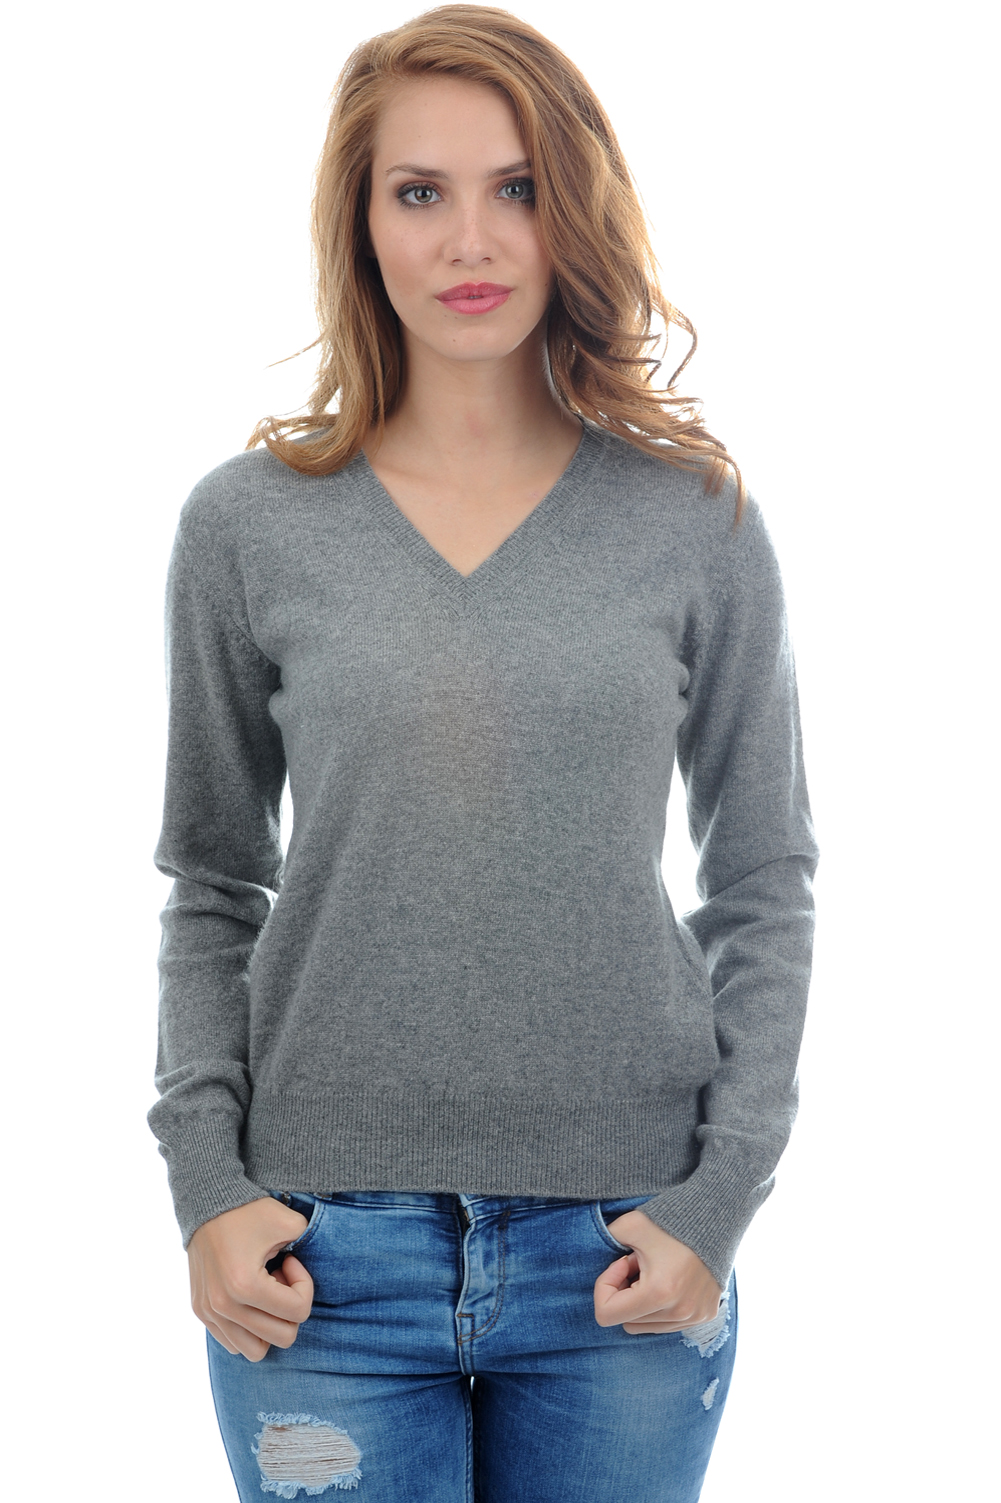 Cashmere ladies timeless classics faustine grey marl s